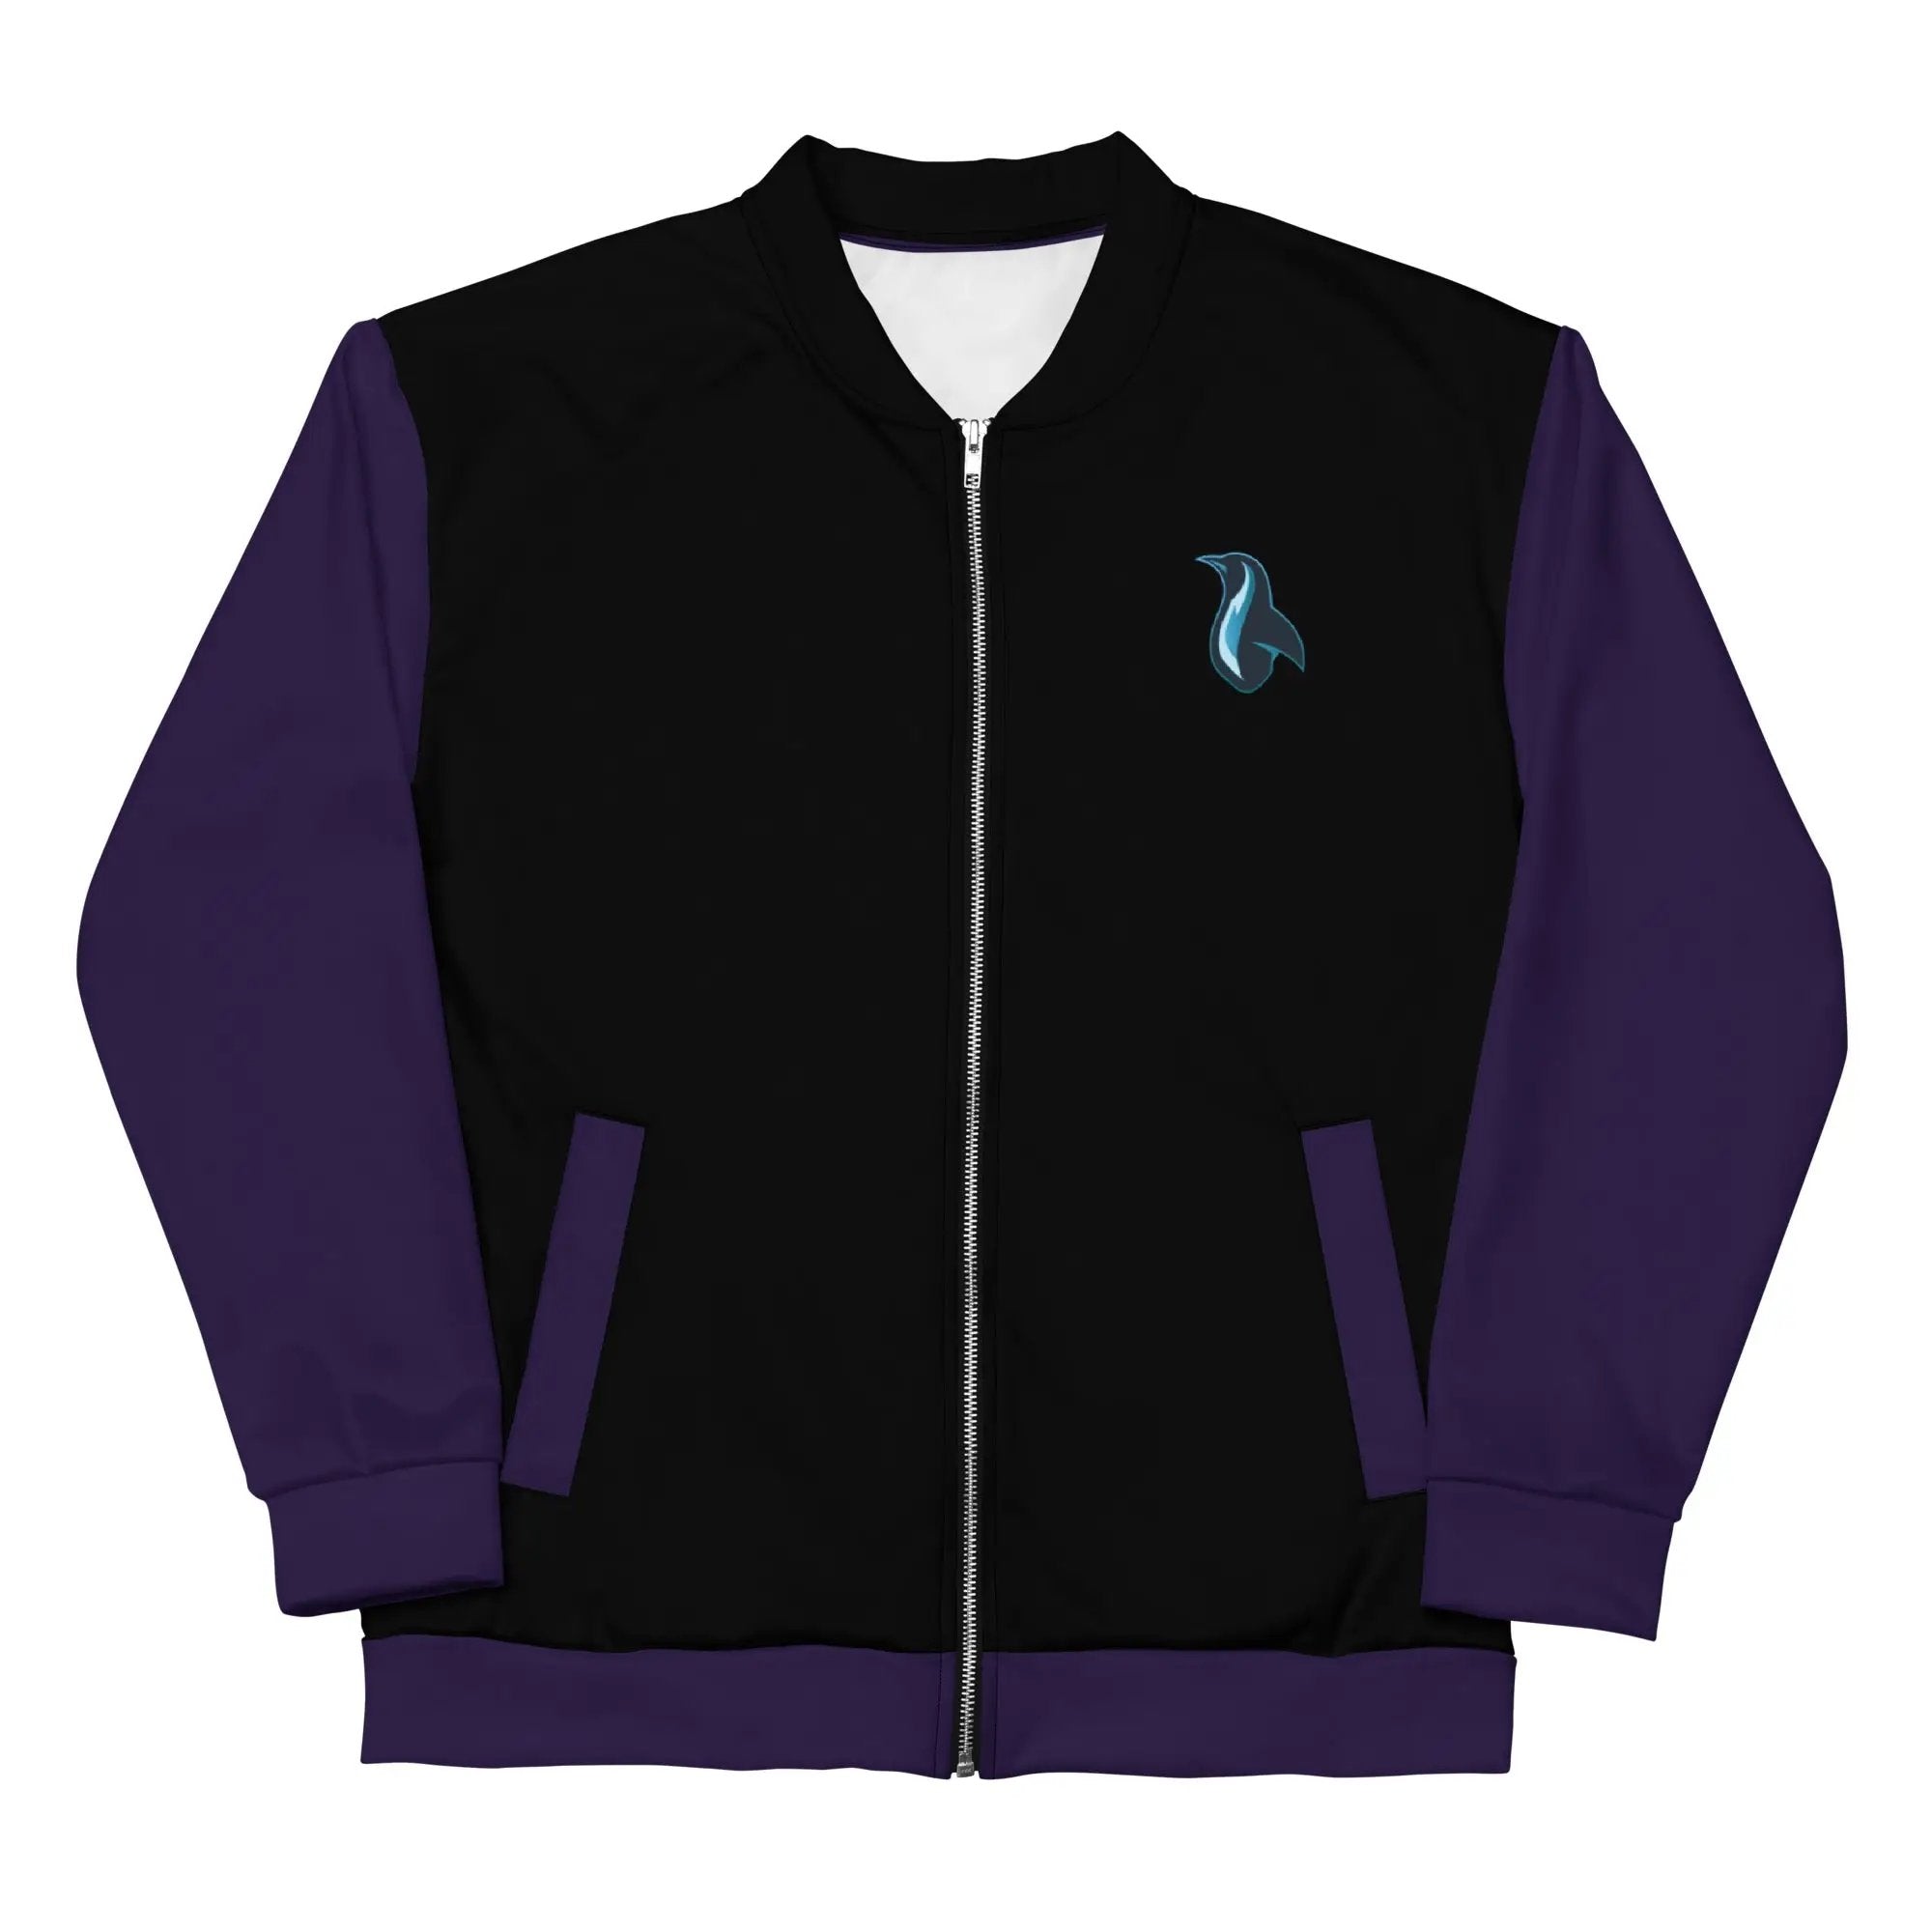 a black and purple jacket with a red cross on it